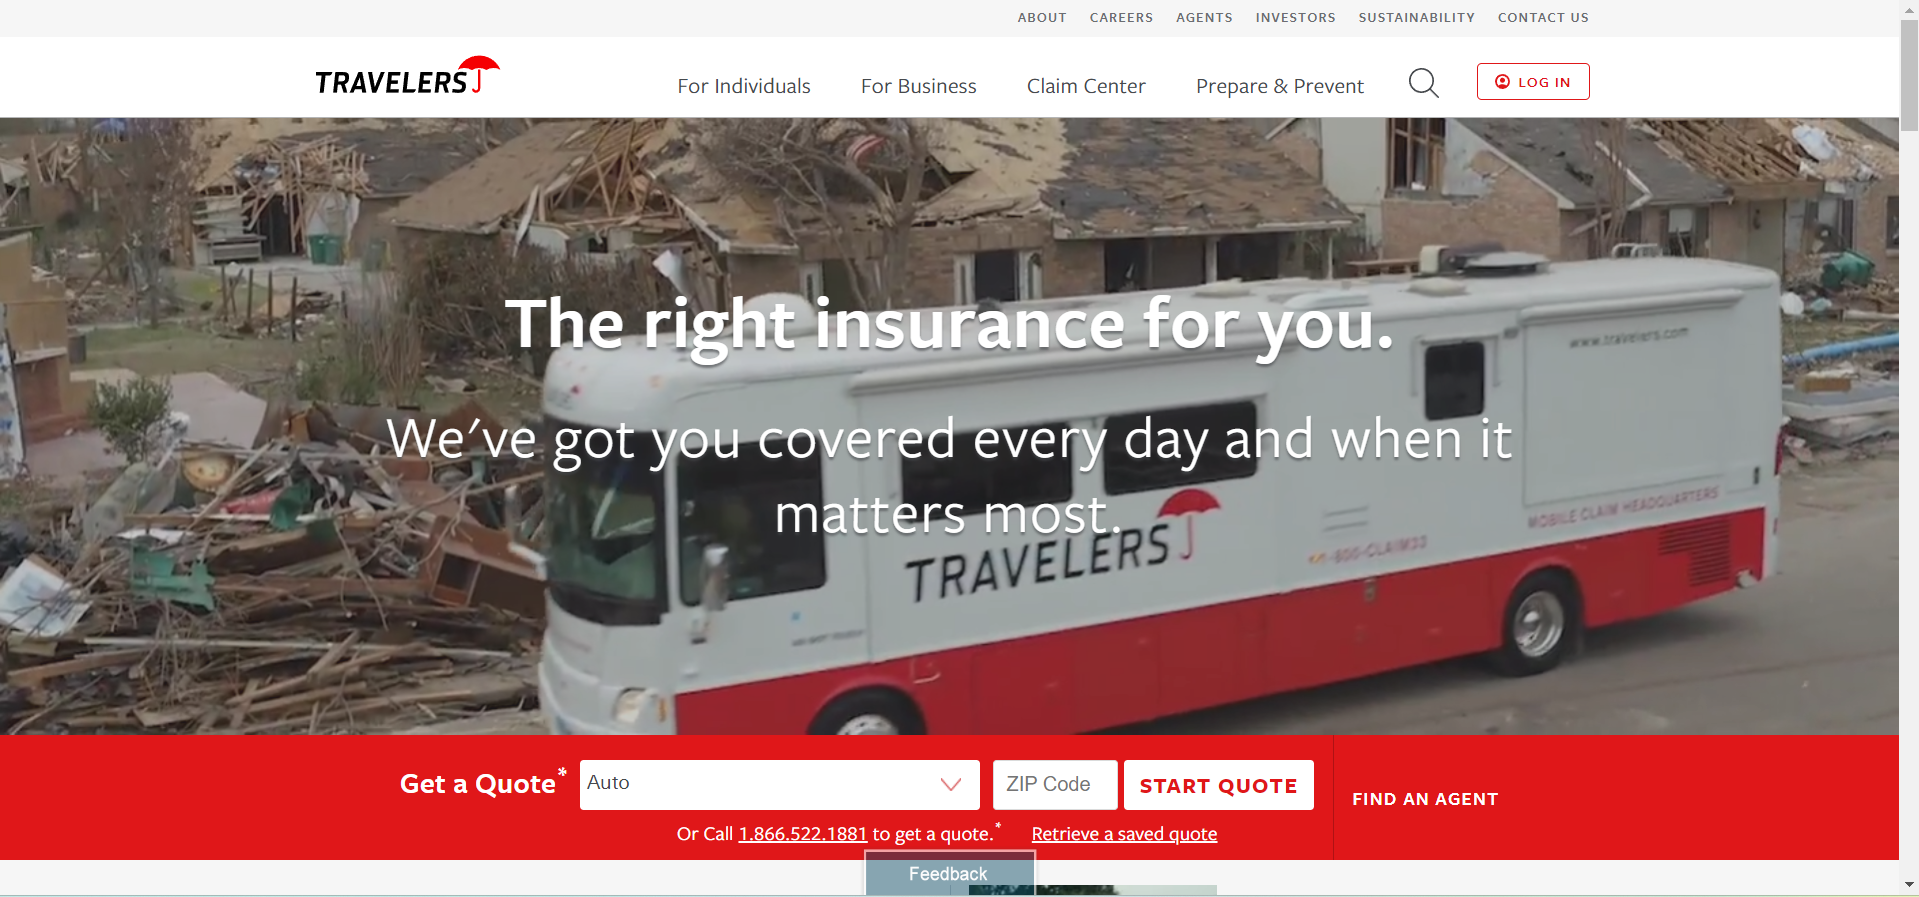 Travelers: Best Business Insurance for Travel Agencies